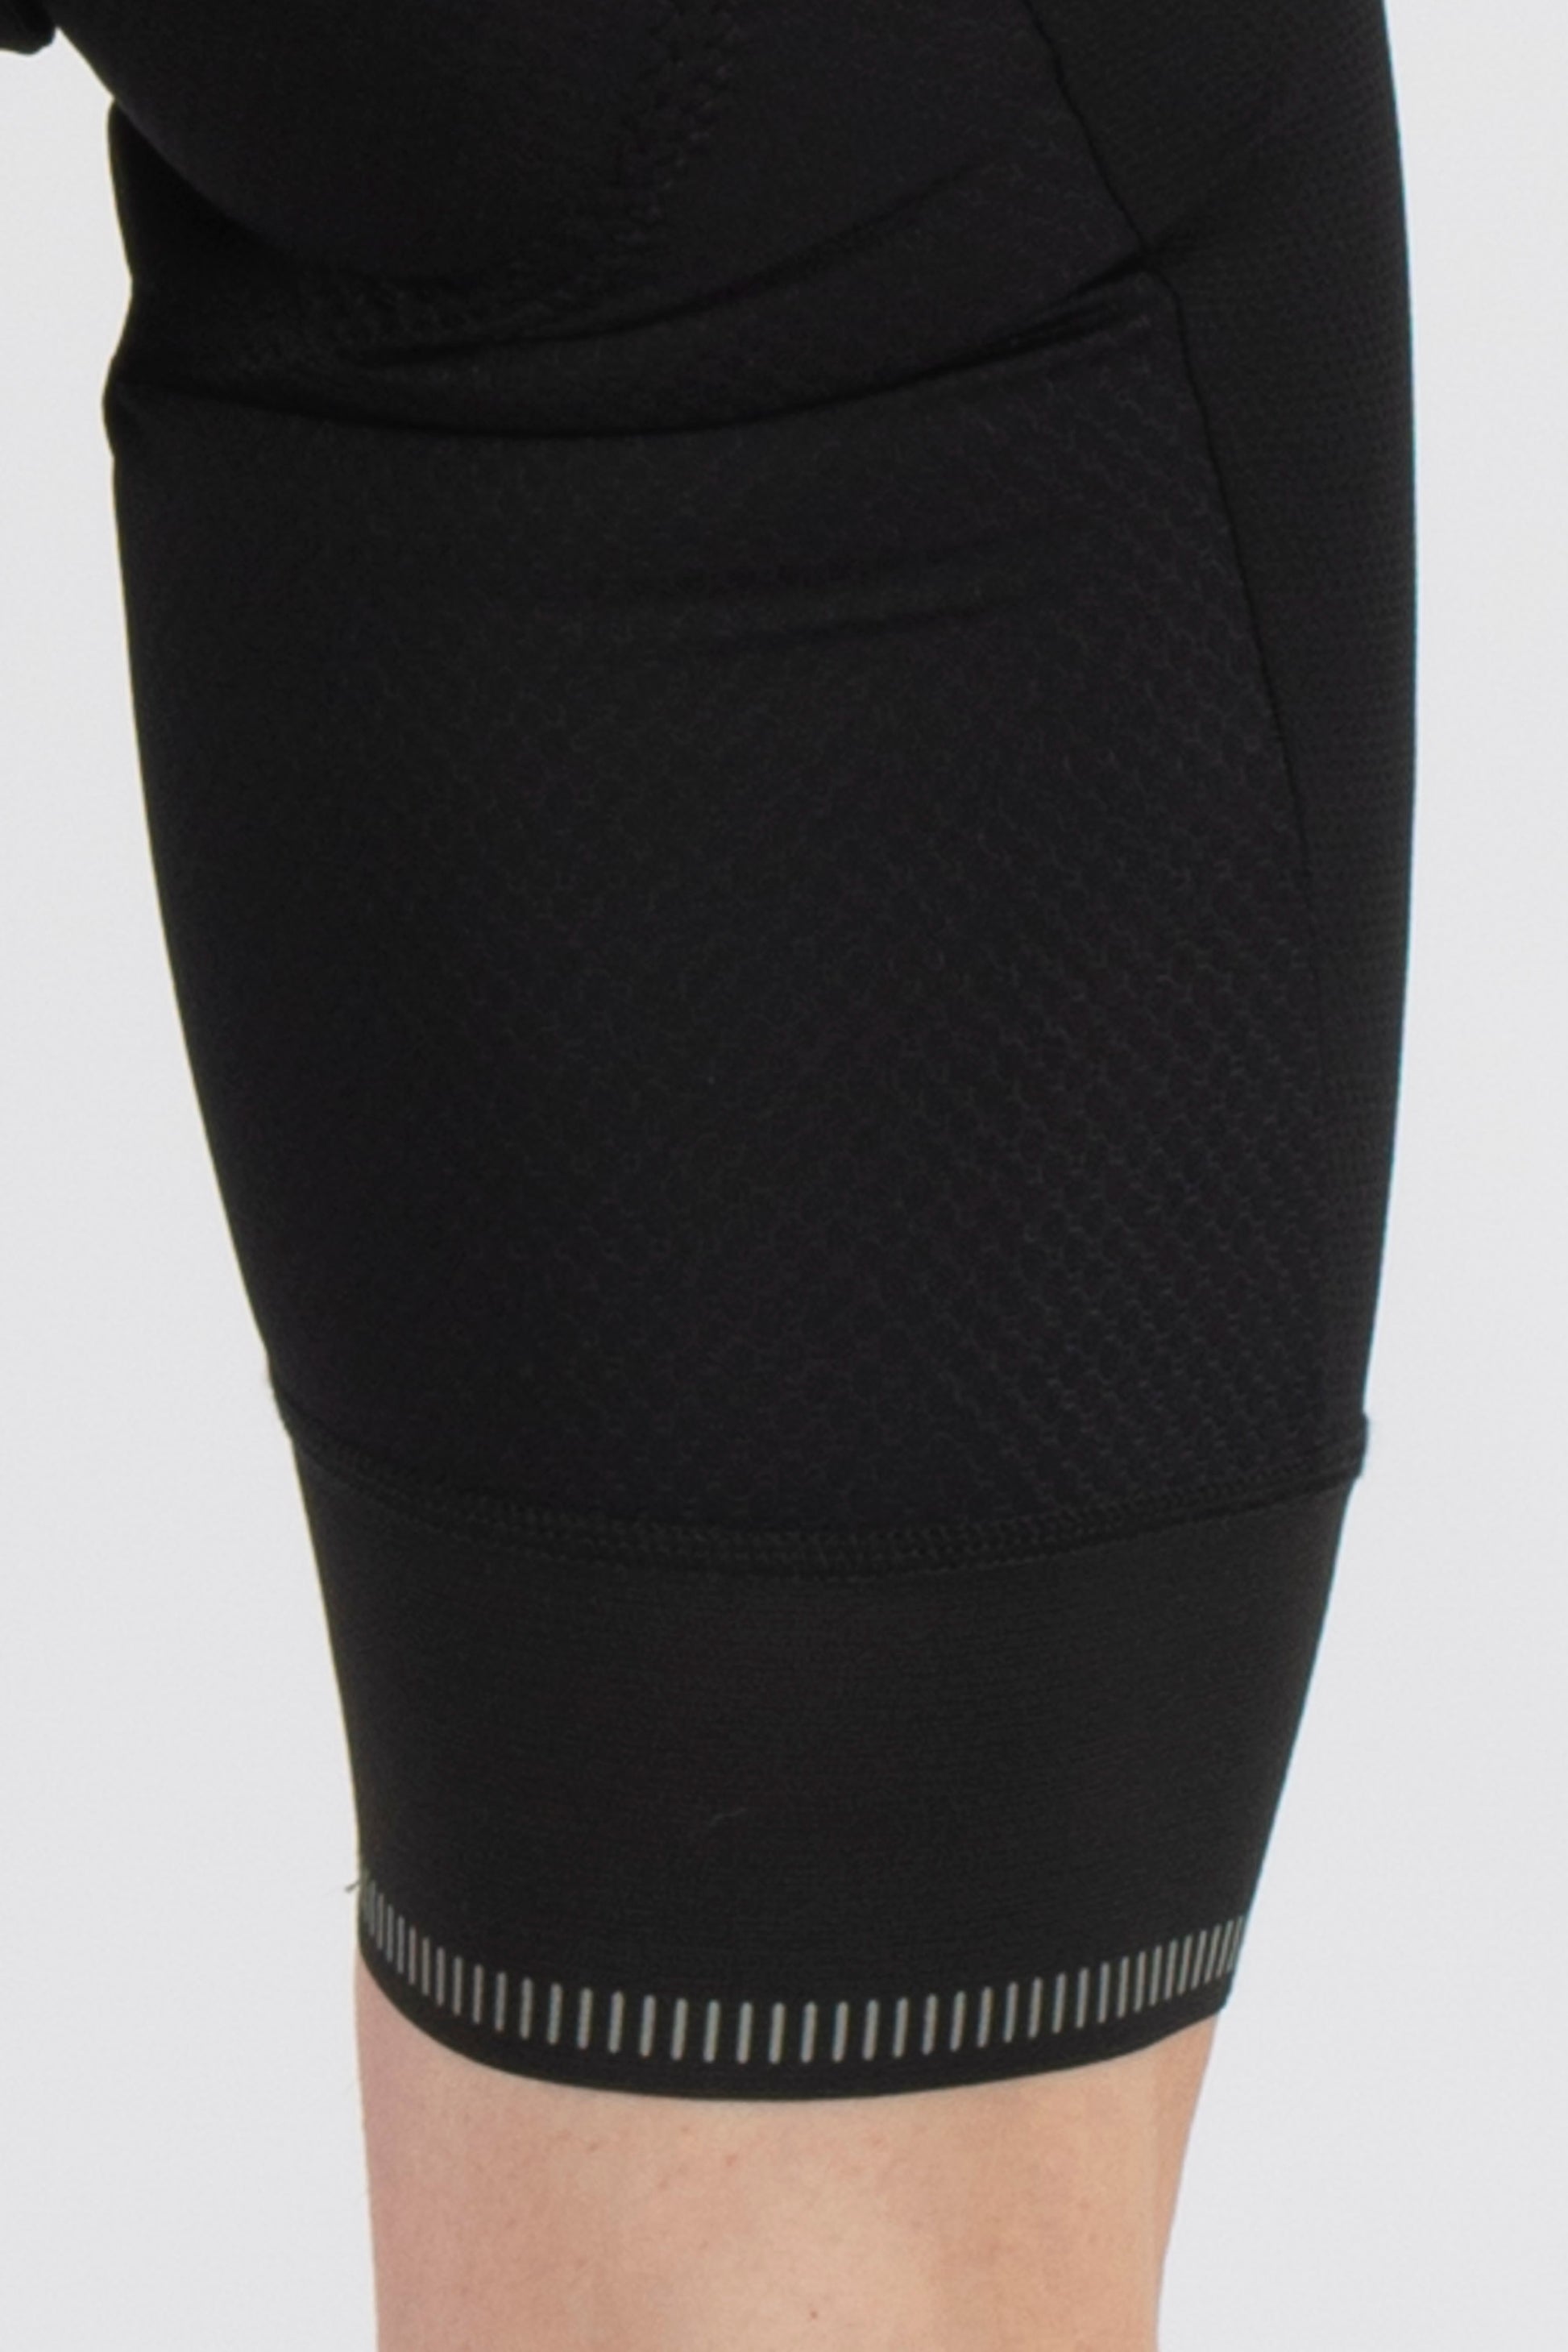 Carbon v2 Bibshorts - Lusso Cycle Wear